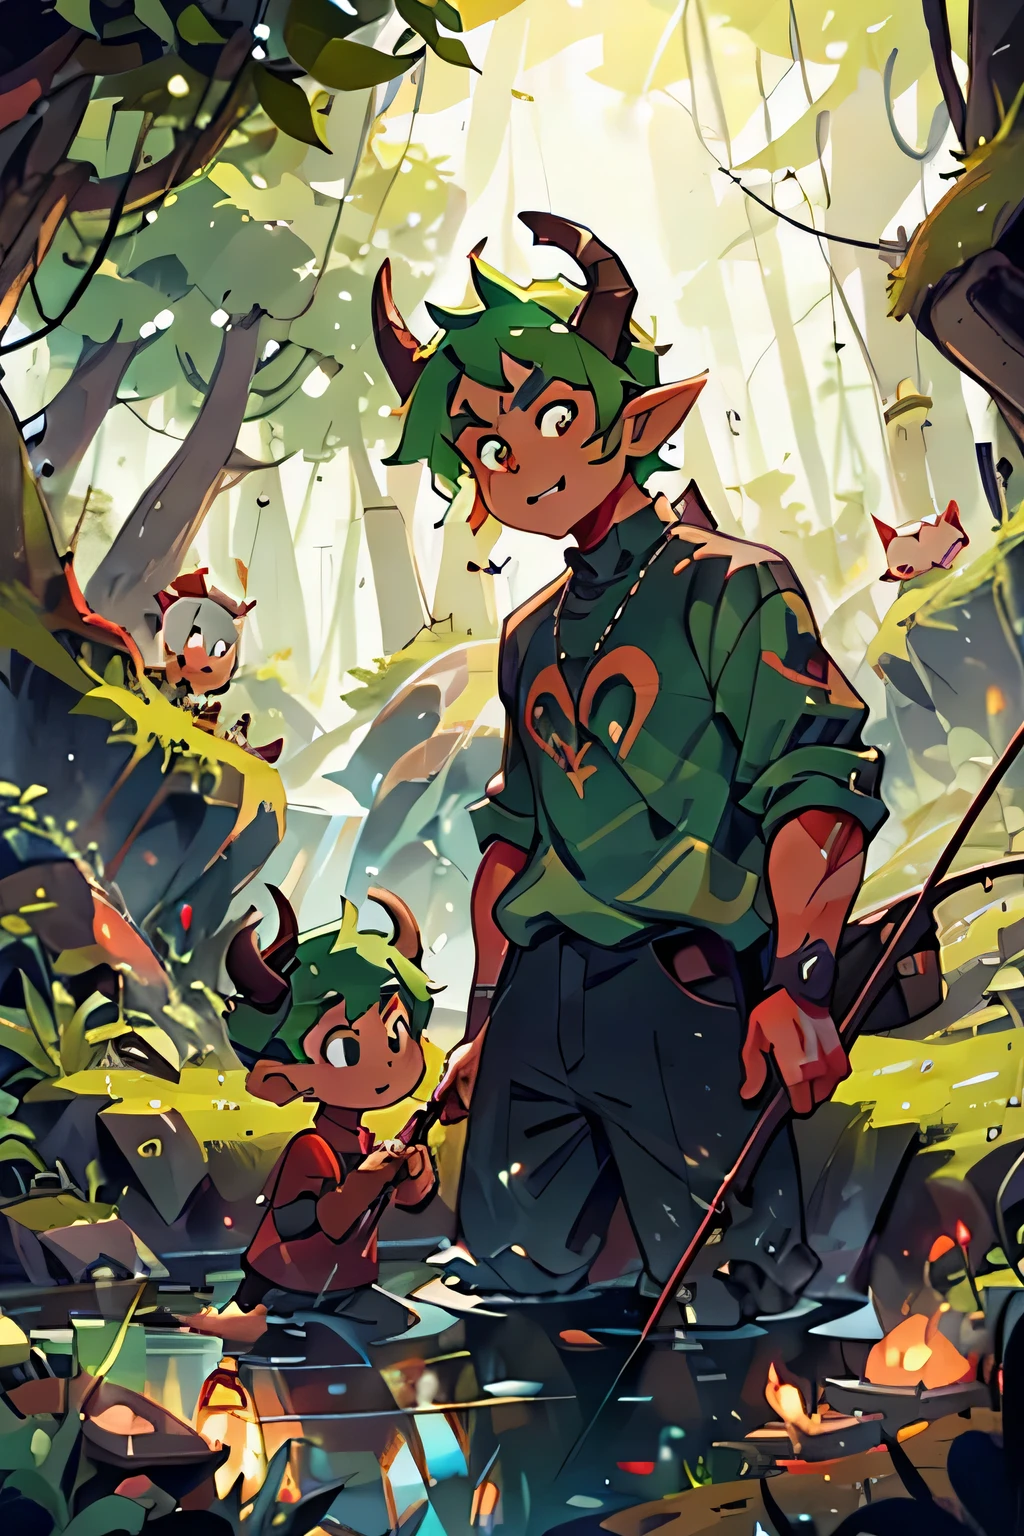 A father and a son devil fishing in lava together, green hair, horns 